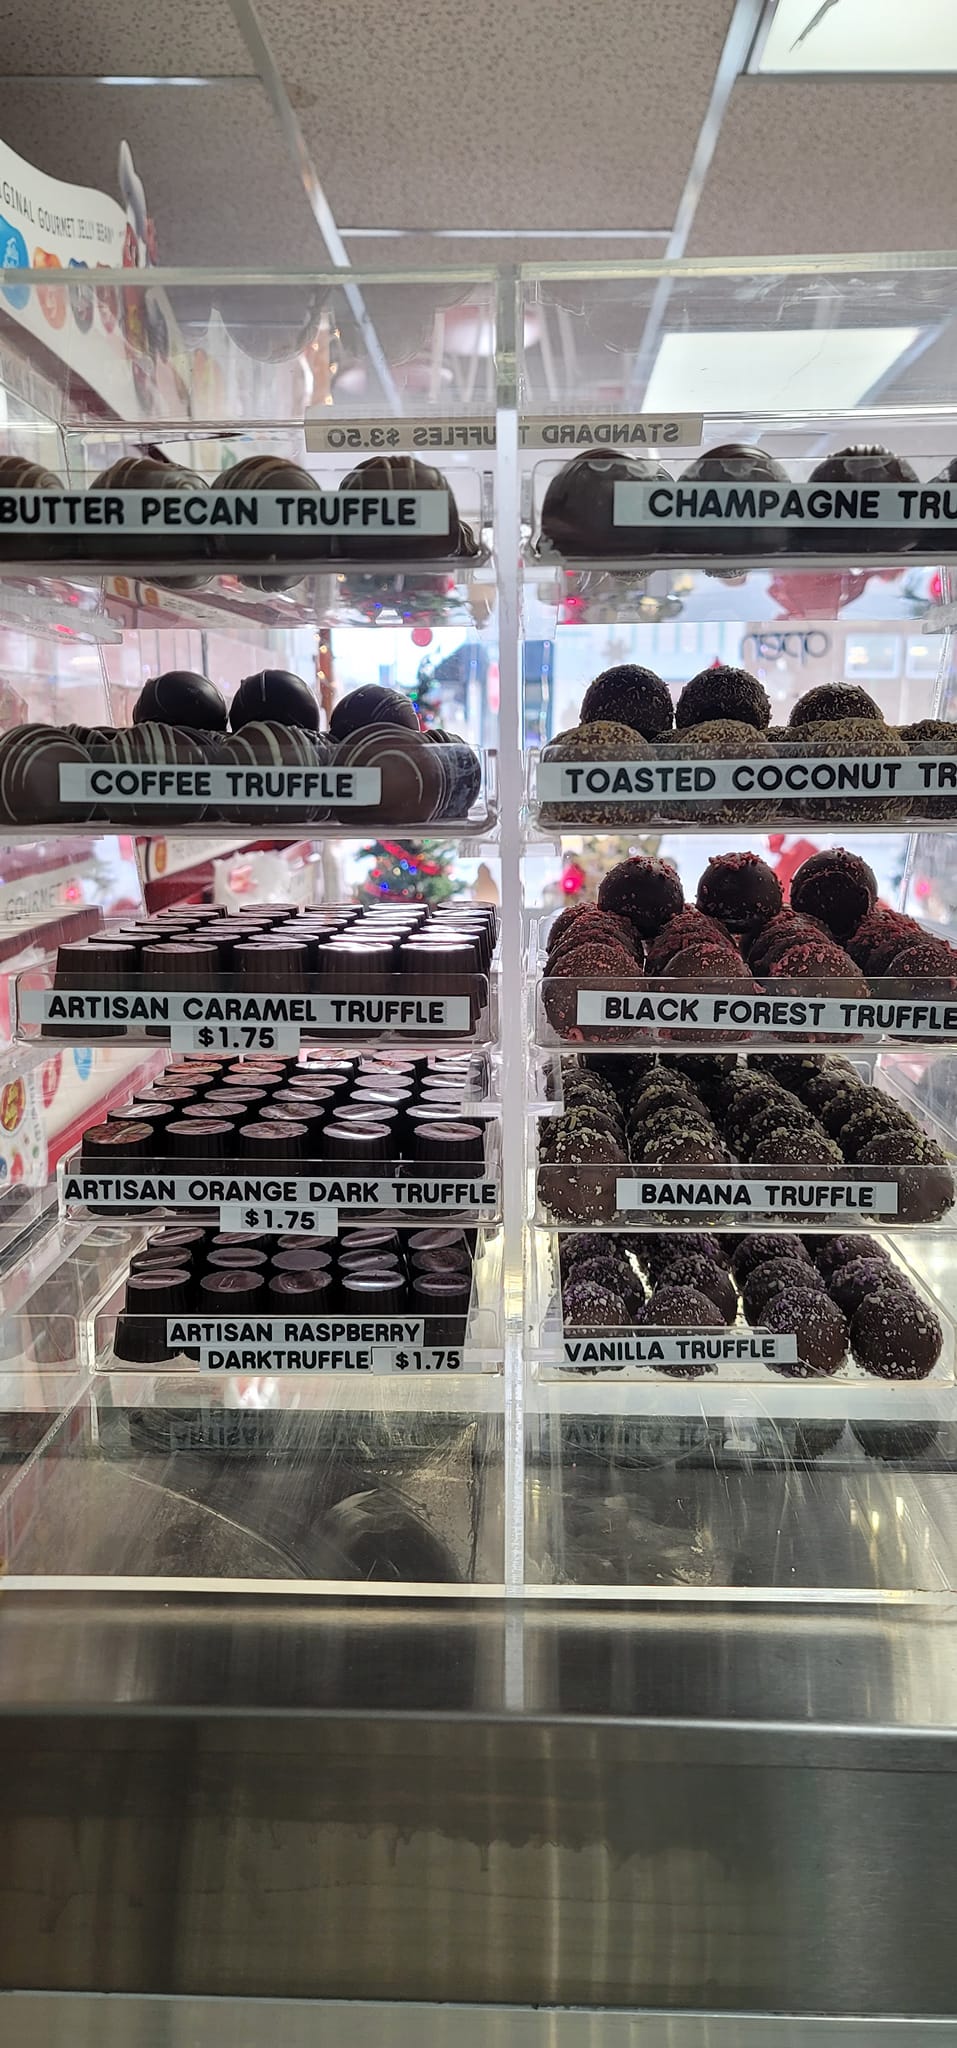 A display case full of chocolate covered donuts.